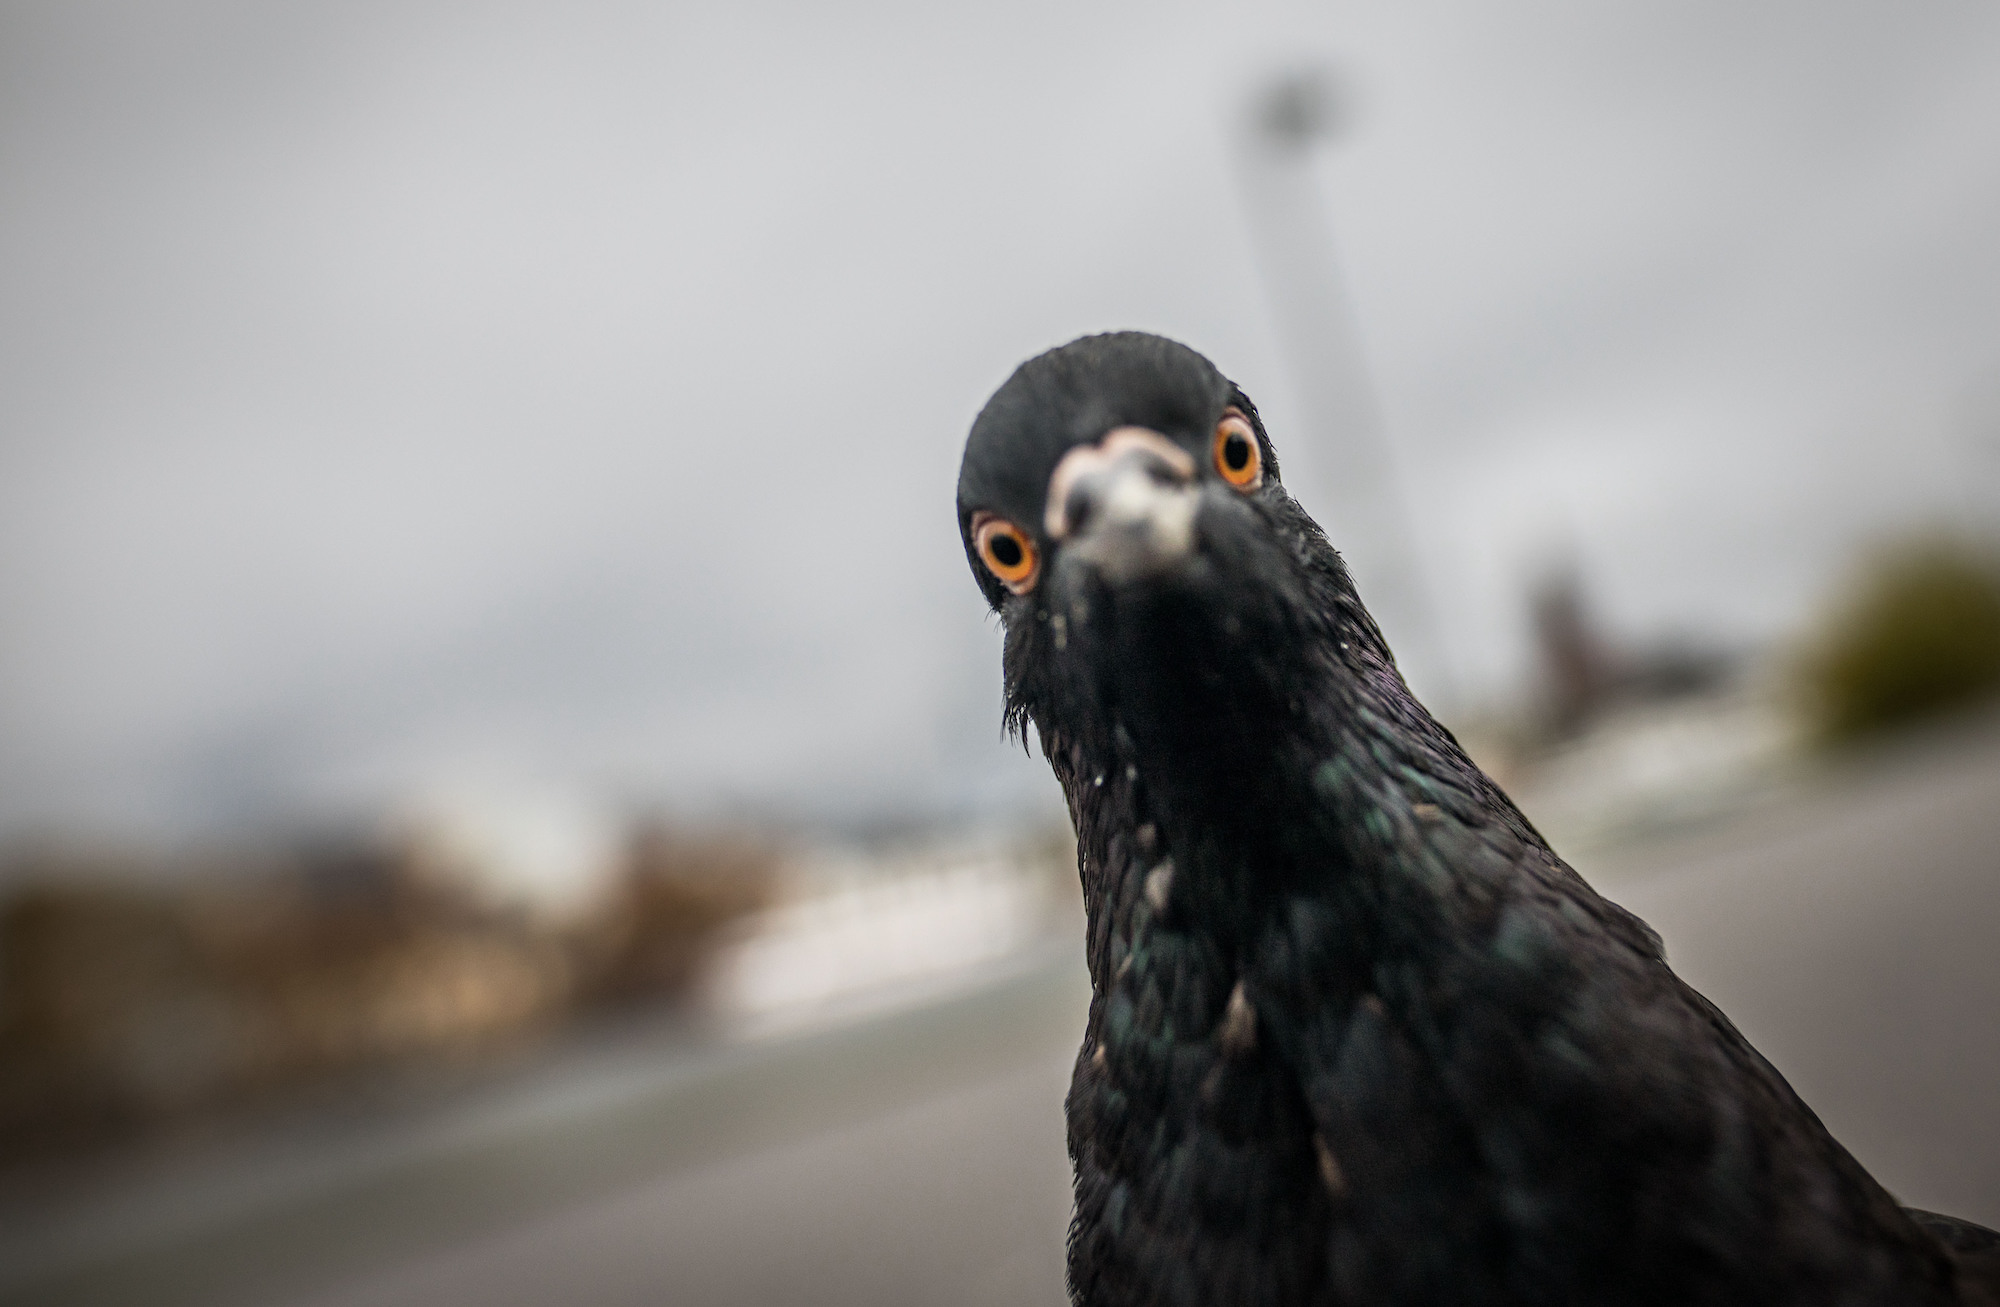 A pigeon looks in the photographer's camera in Frankfurt am Main, western Germany, on November 17, 2016. / AFP / dpa / Frank Rumpenhorst / Germany OUT (Photo credit should read FRANK RUMPENHORST/DPA/AFP via Getty Images)